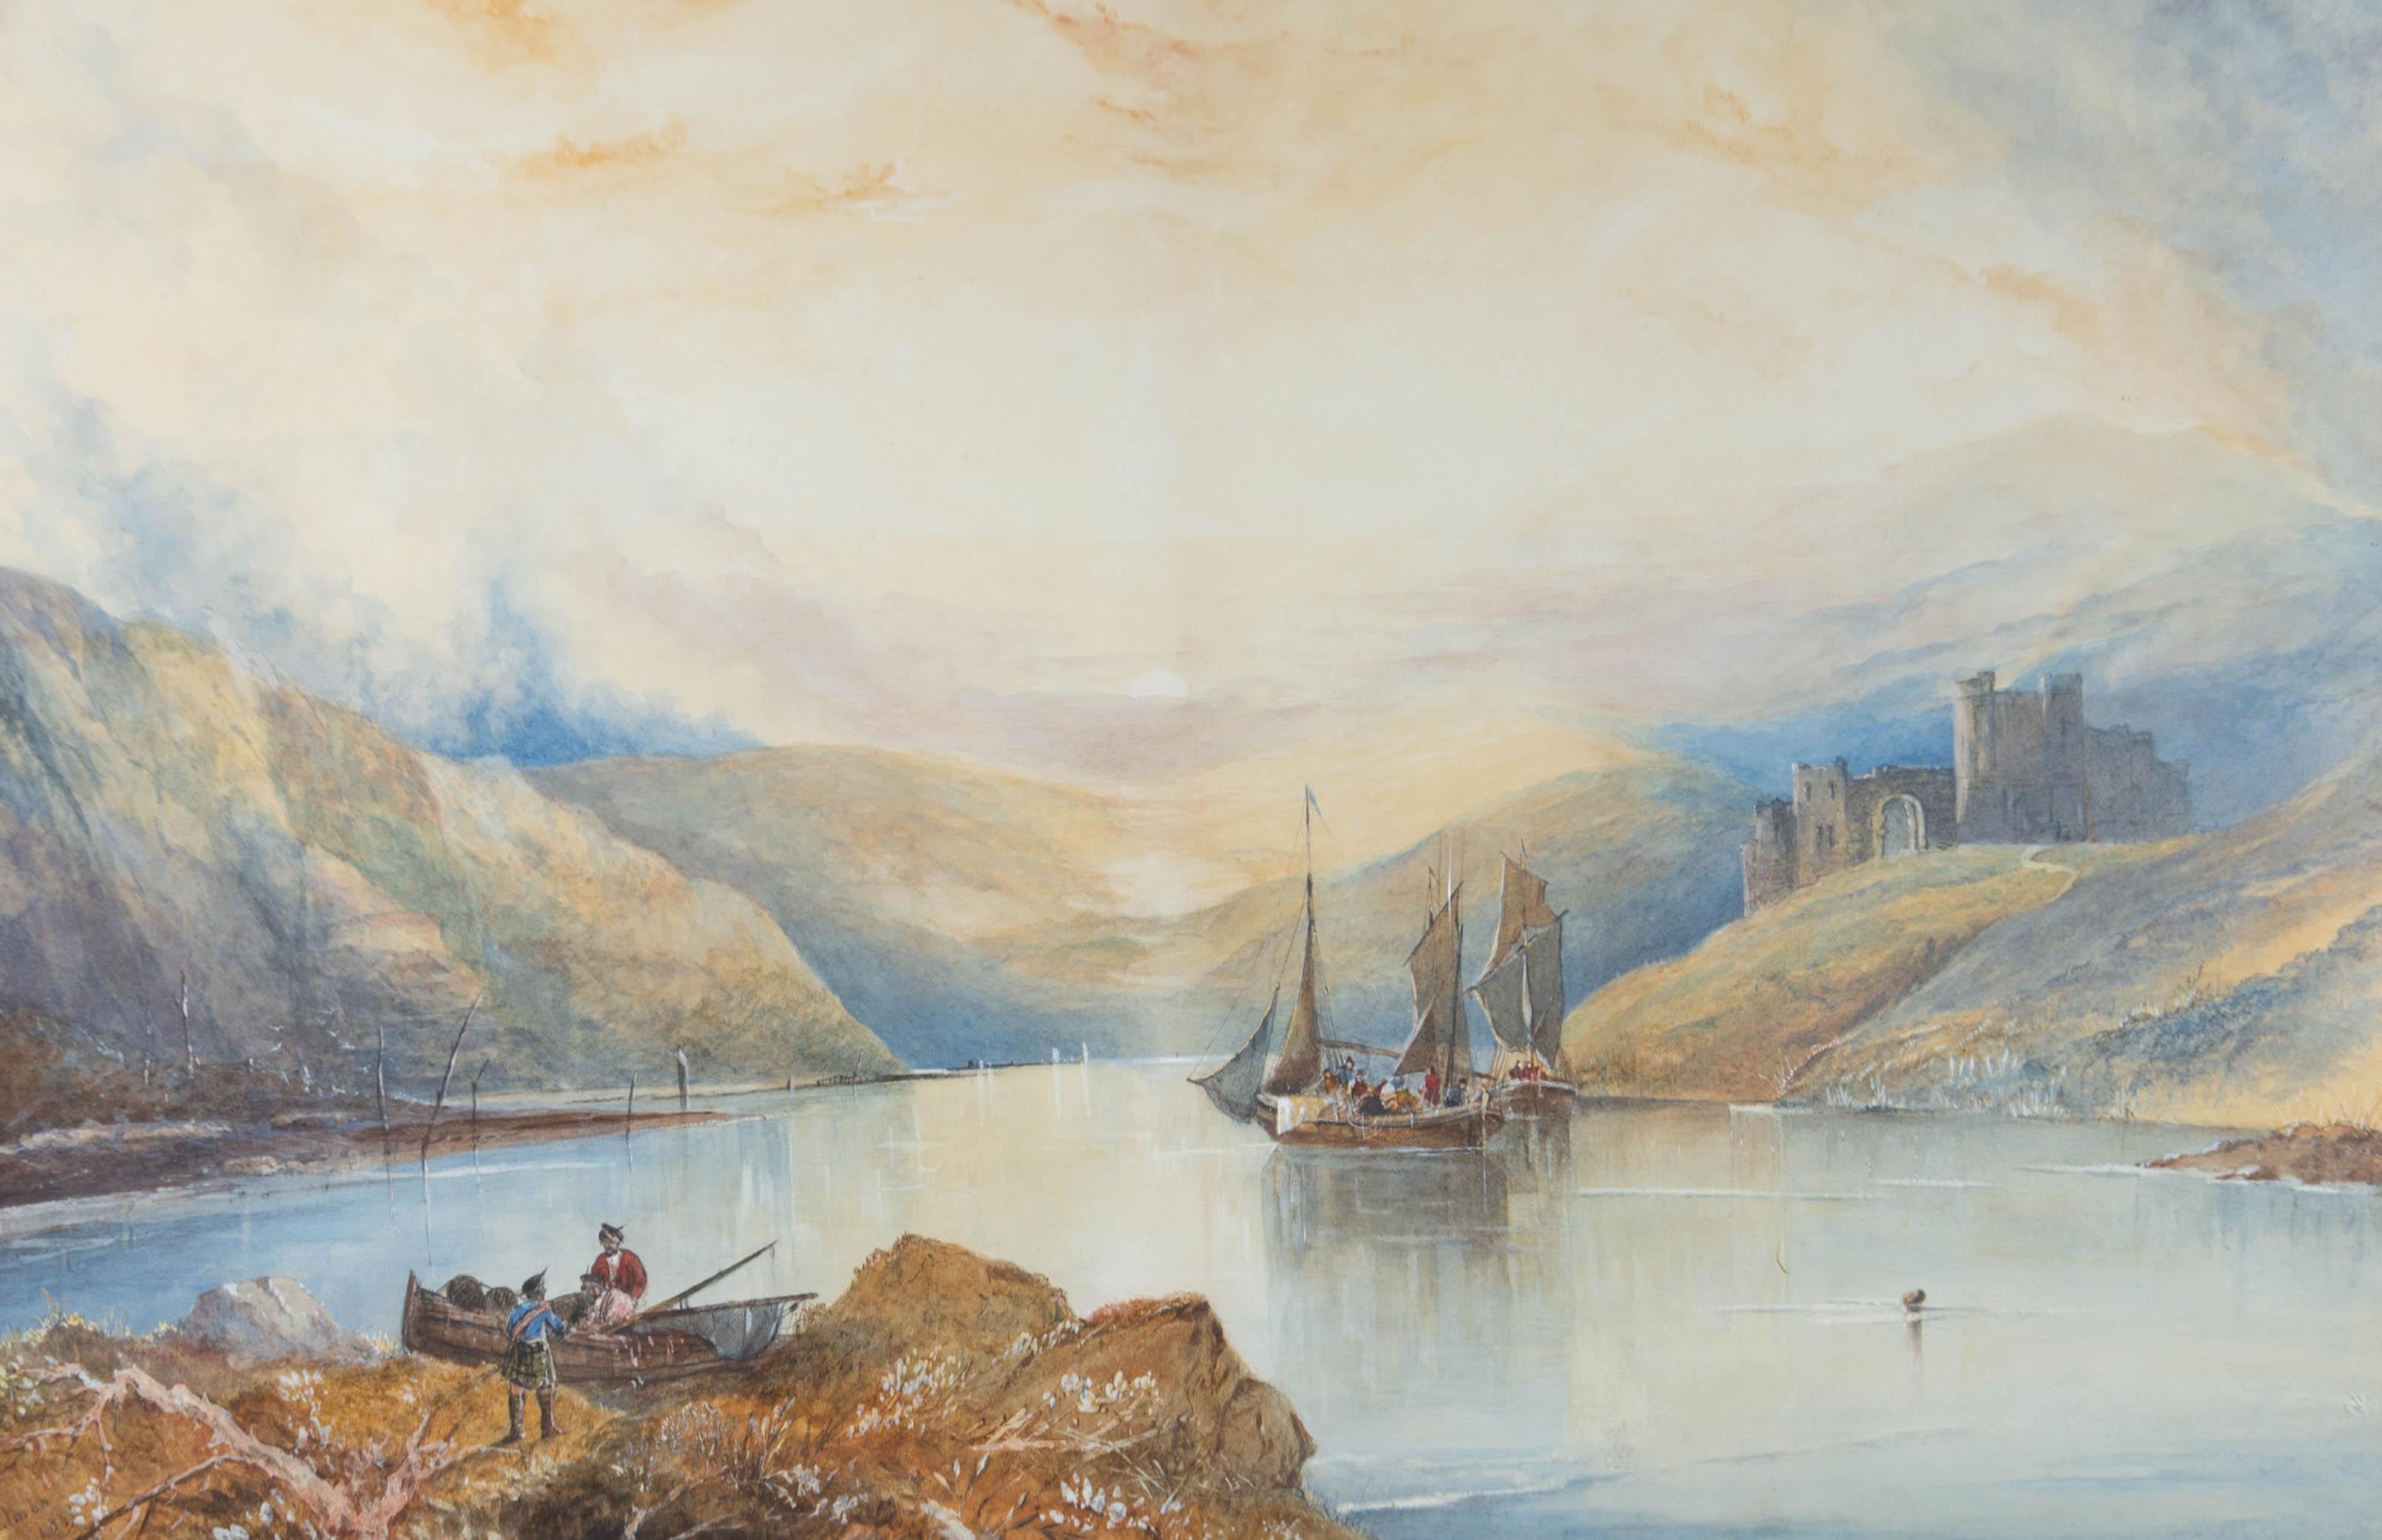 A picturesque Scottish lake featuring a castle on the hillside amongst the mountainous landscape. The castle is being overlooked by the figures on the sailing boats as well as two figures in the foreground both wearing Scottish kilts.

The work